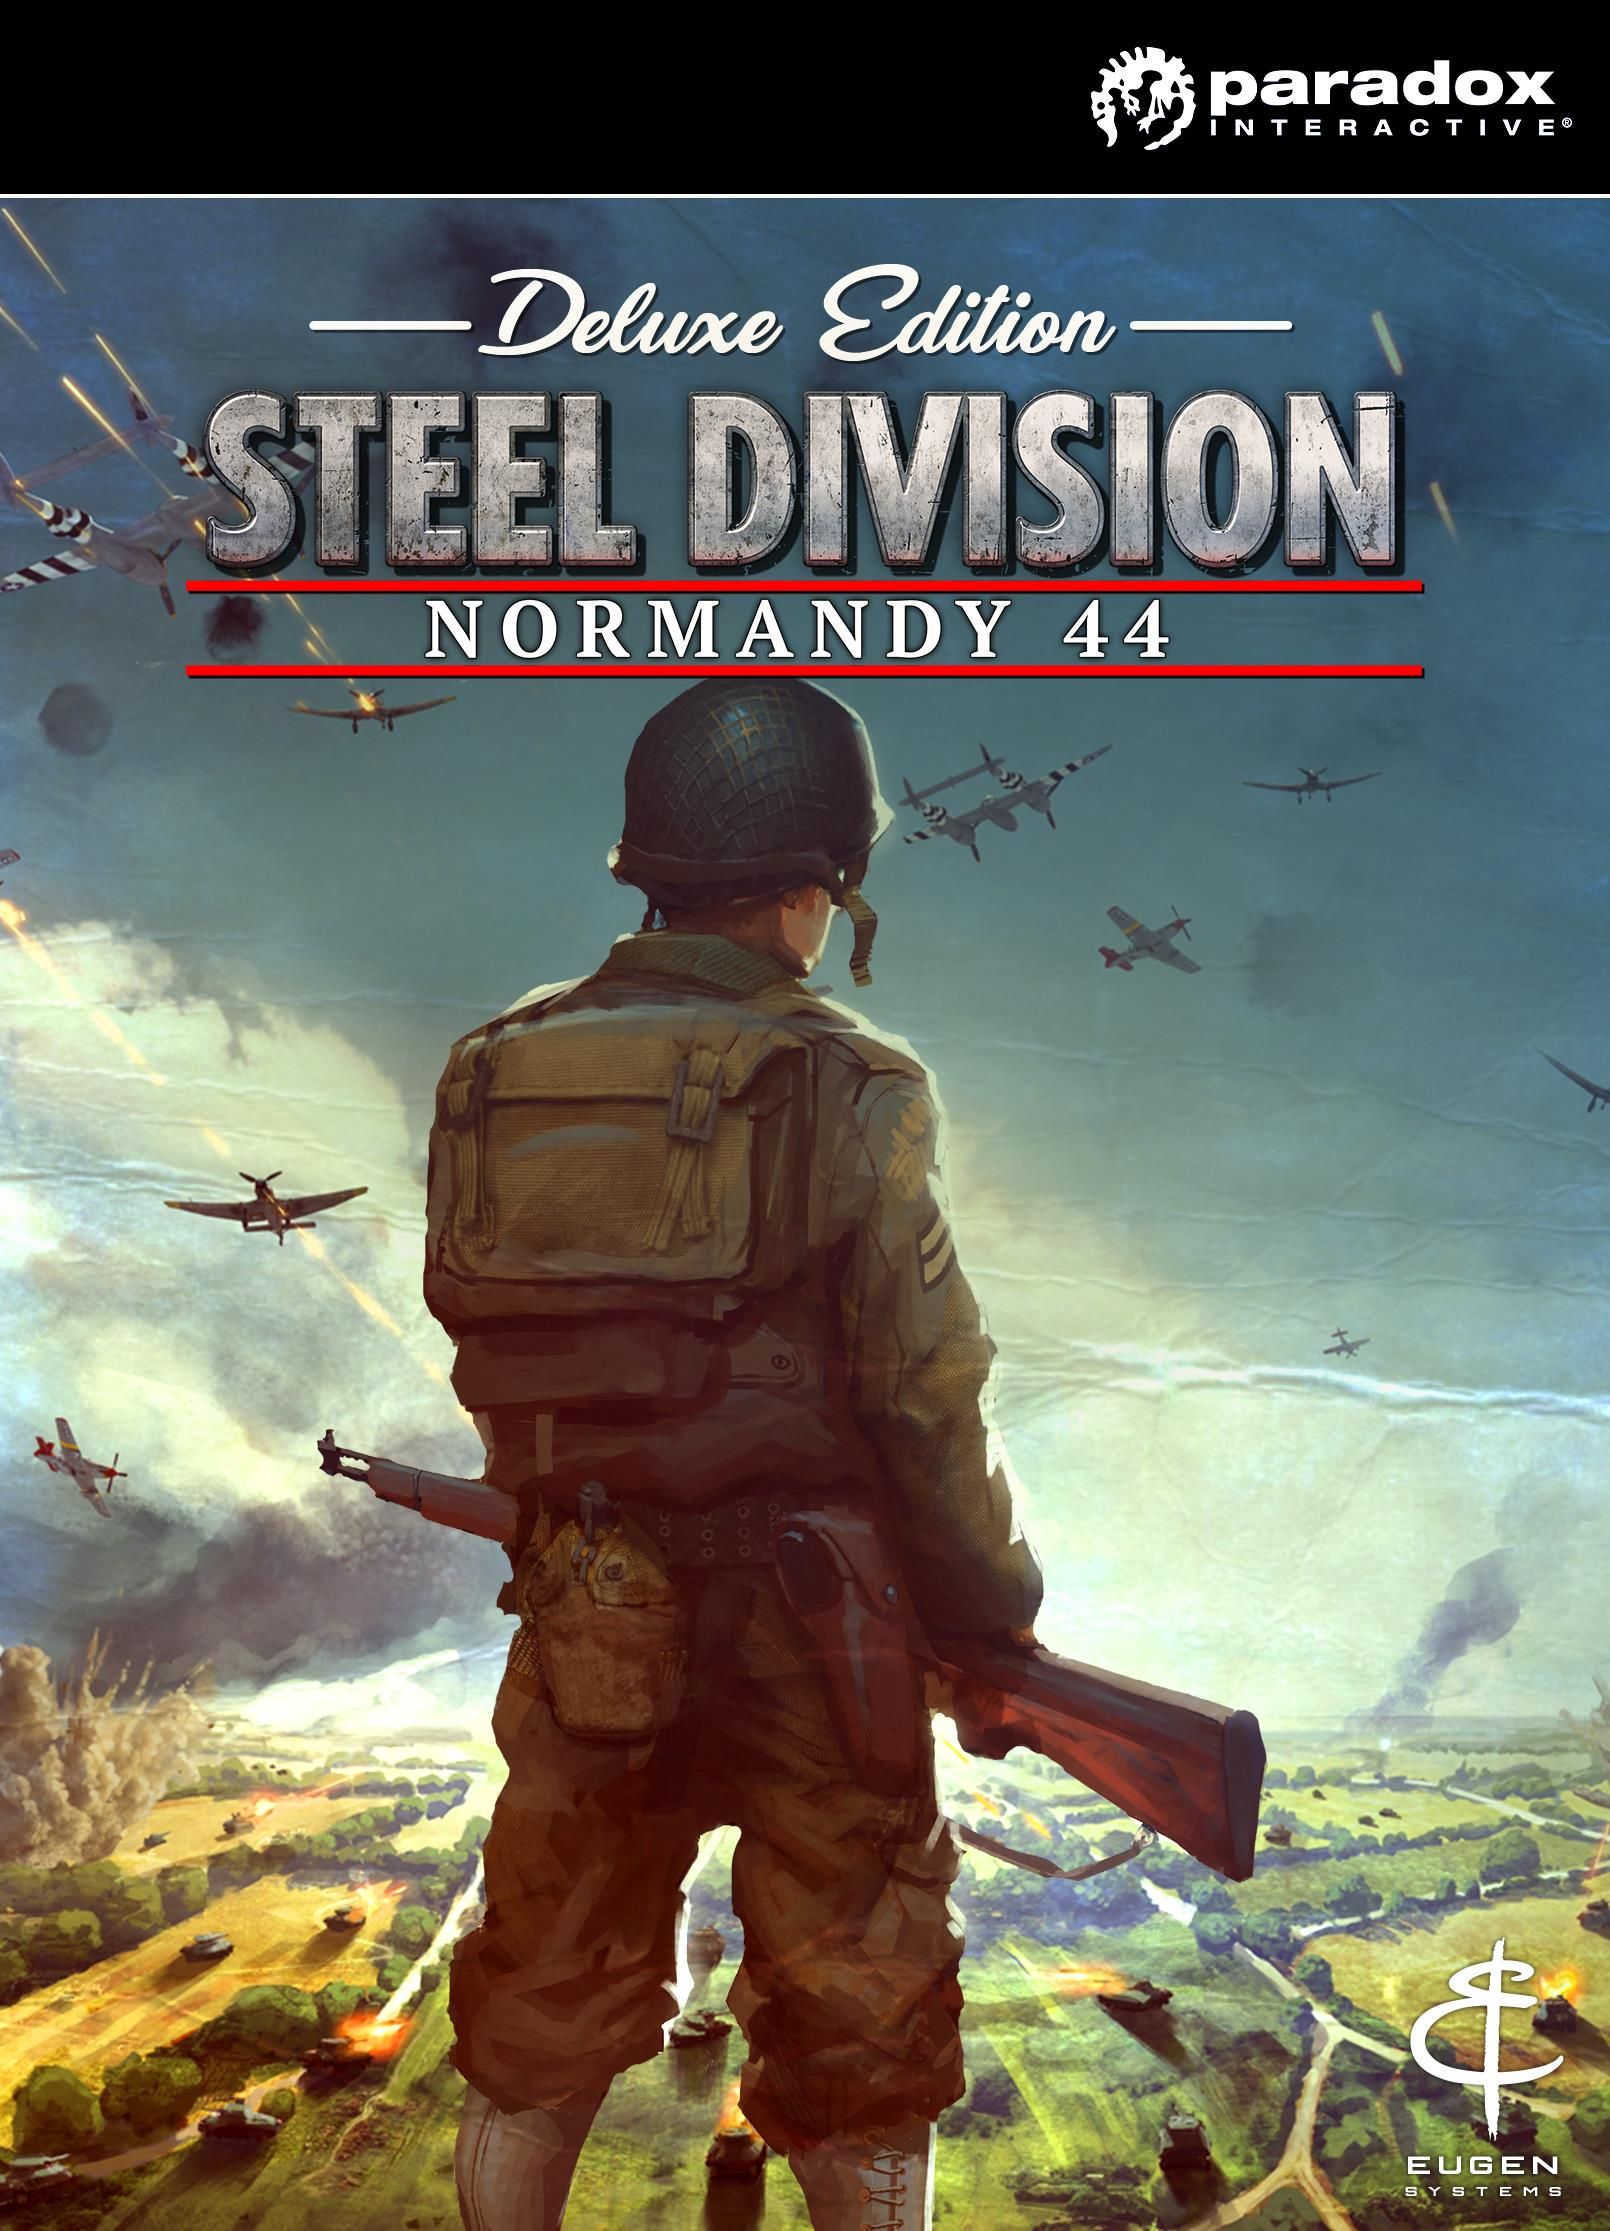 Steel Division Normandy 44 Deluxe